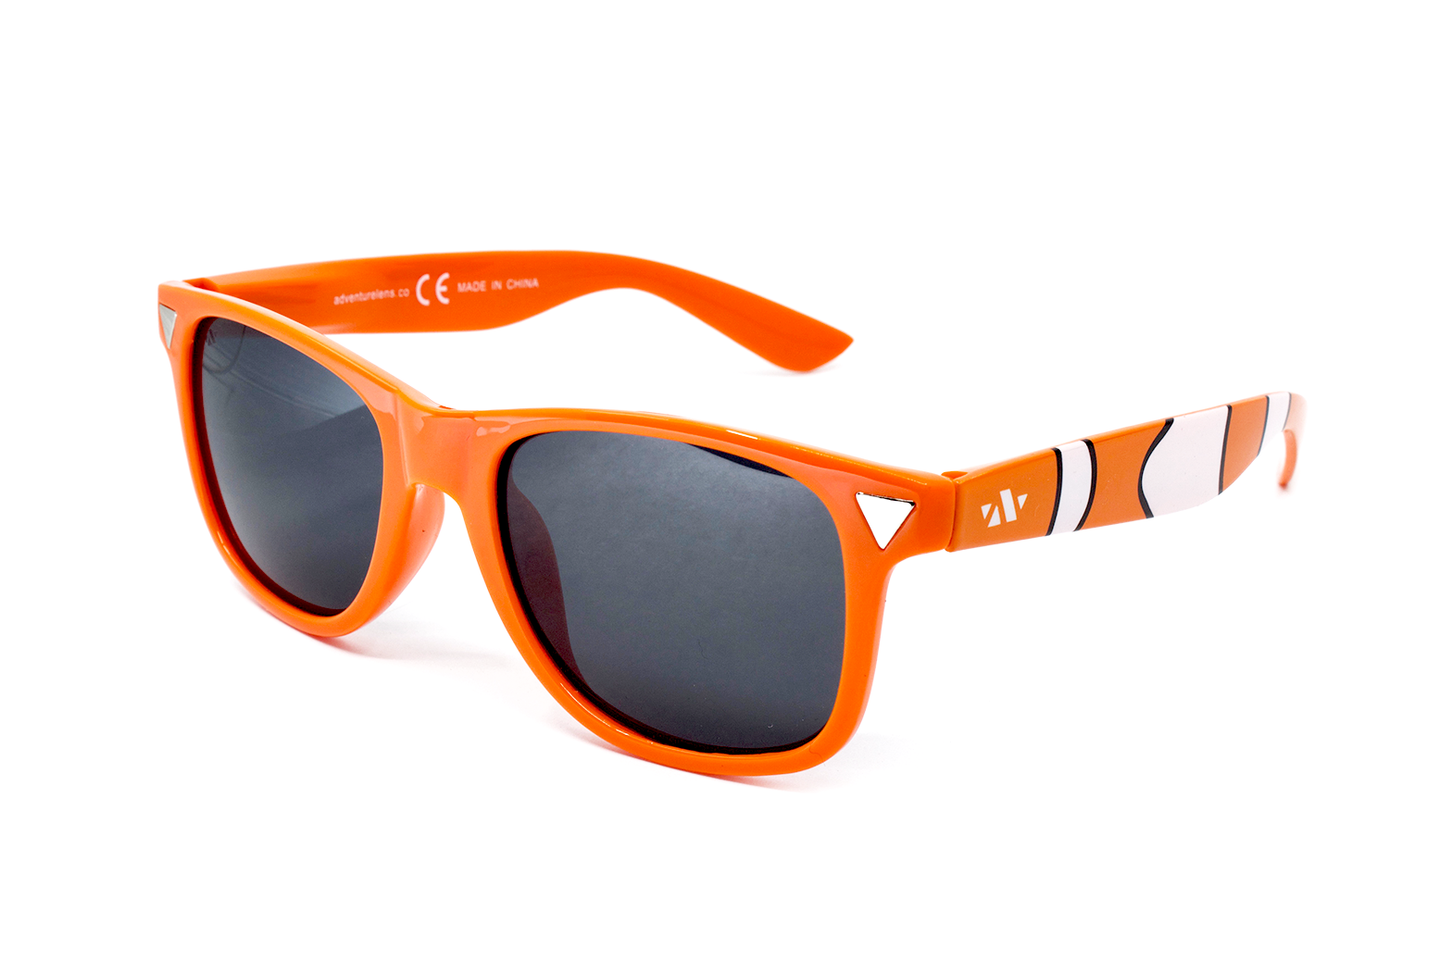 Front view of orange sunglasses with stripes to match clownfish stripes